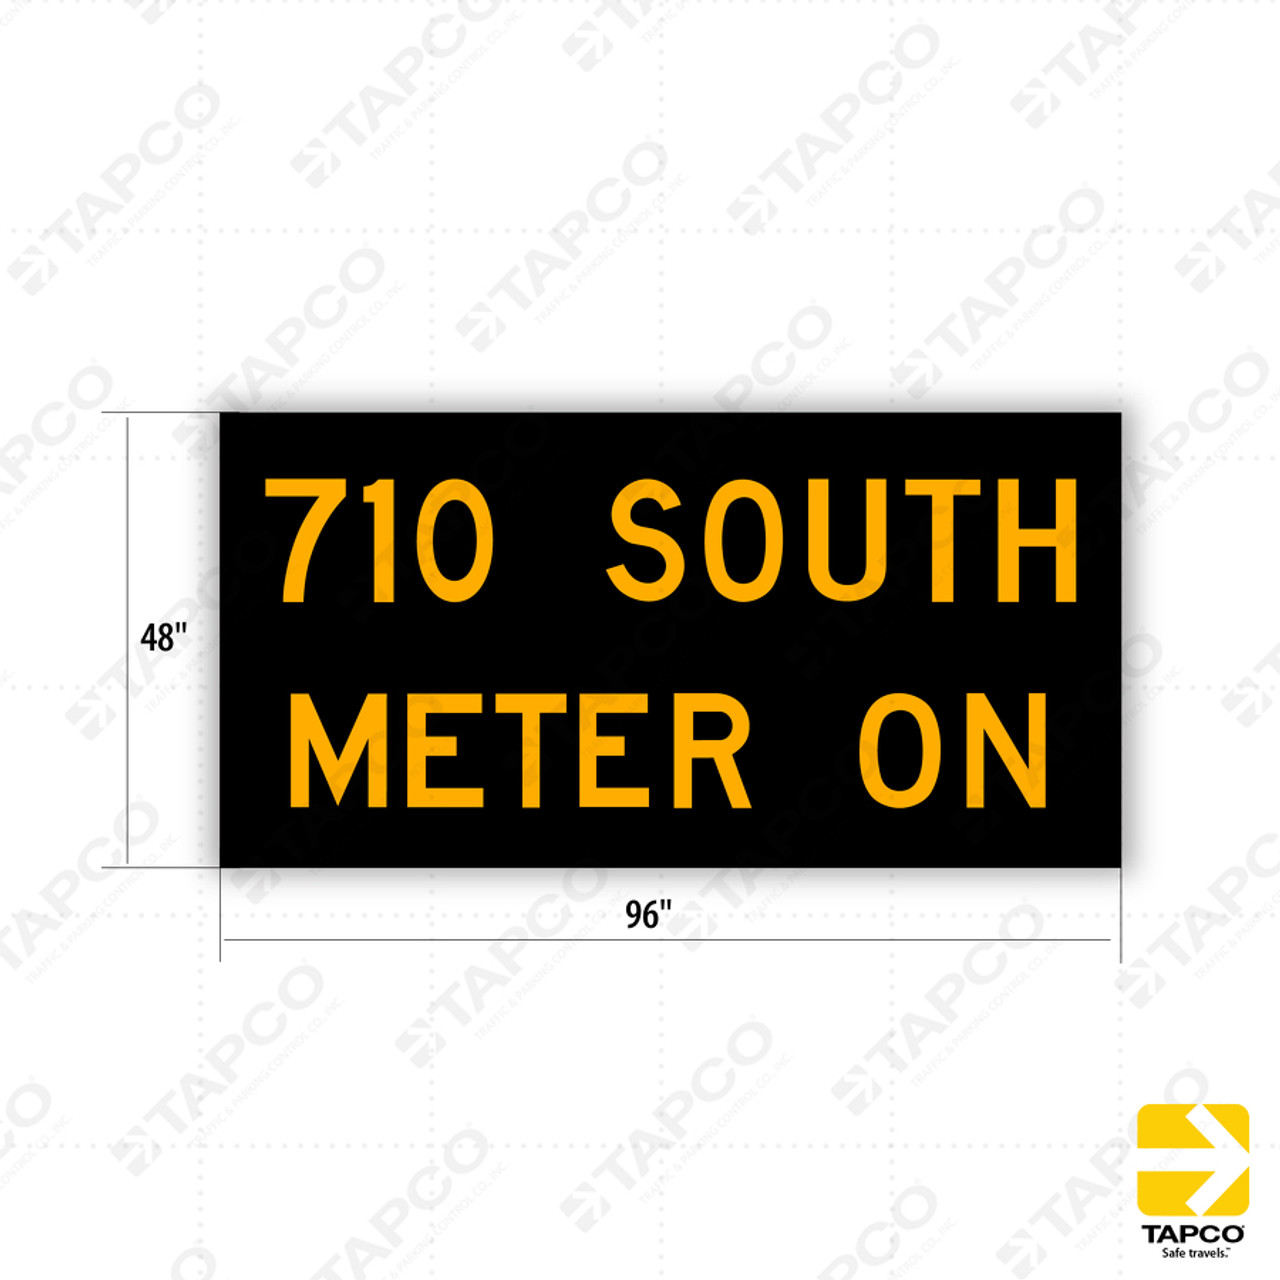 W88-3 (CA) 210 WEST METER ON ACTIVATED BLANK-OUT Sign - Warning